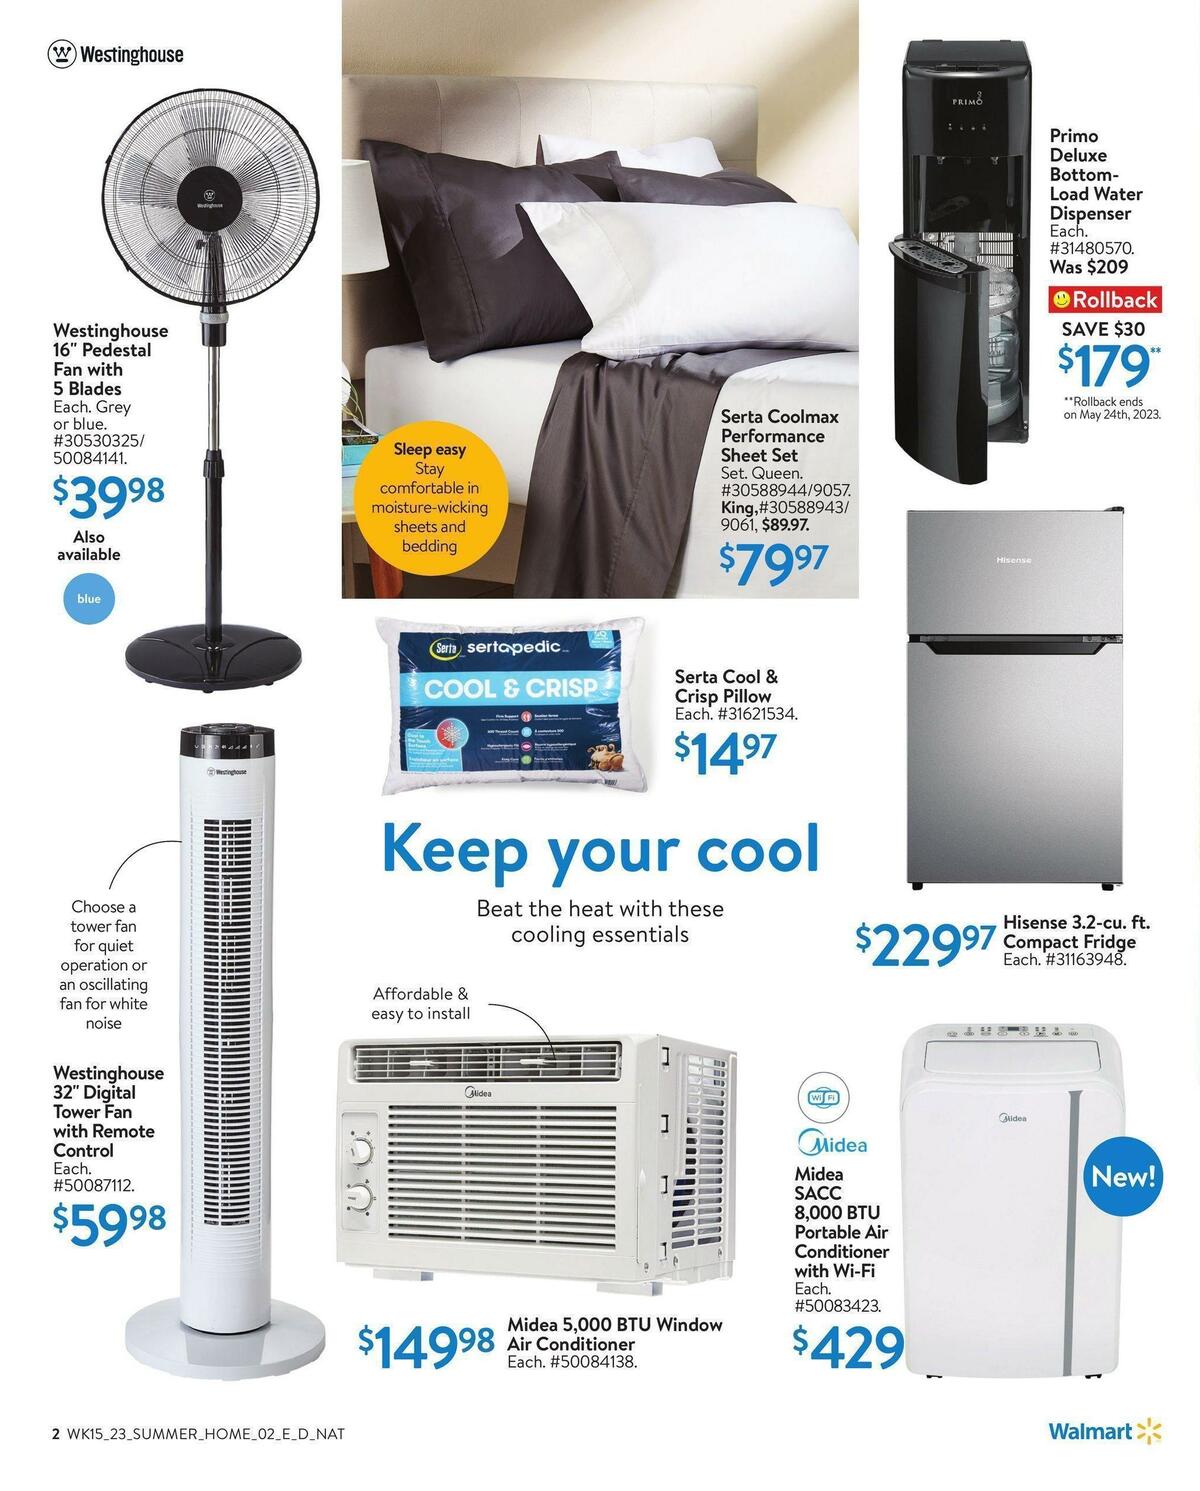 Walmart Summer Home Digest Flyer from May 4